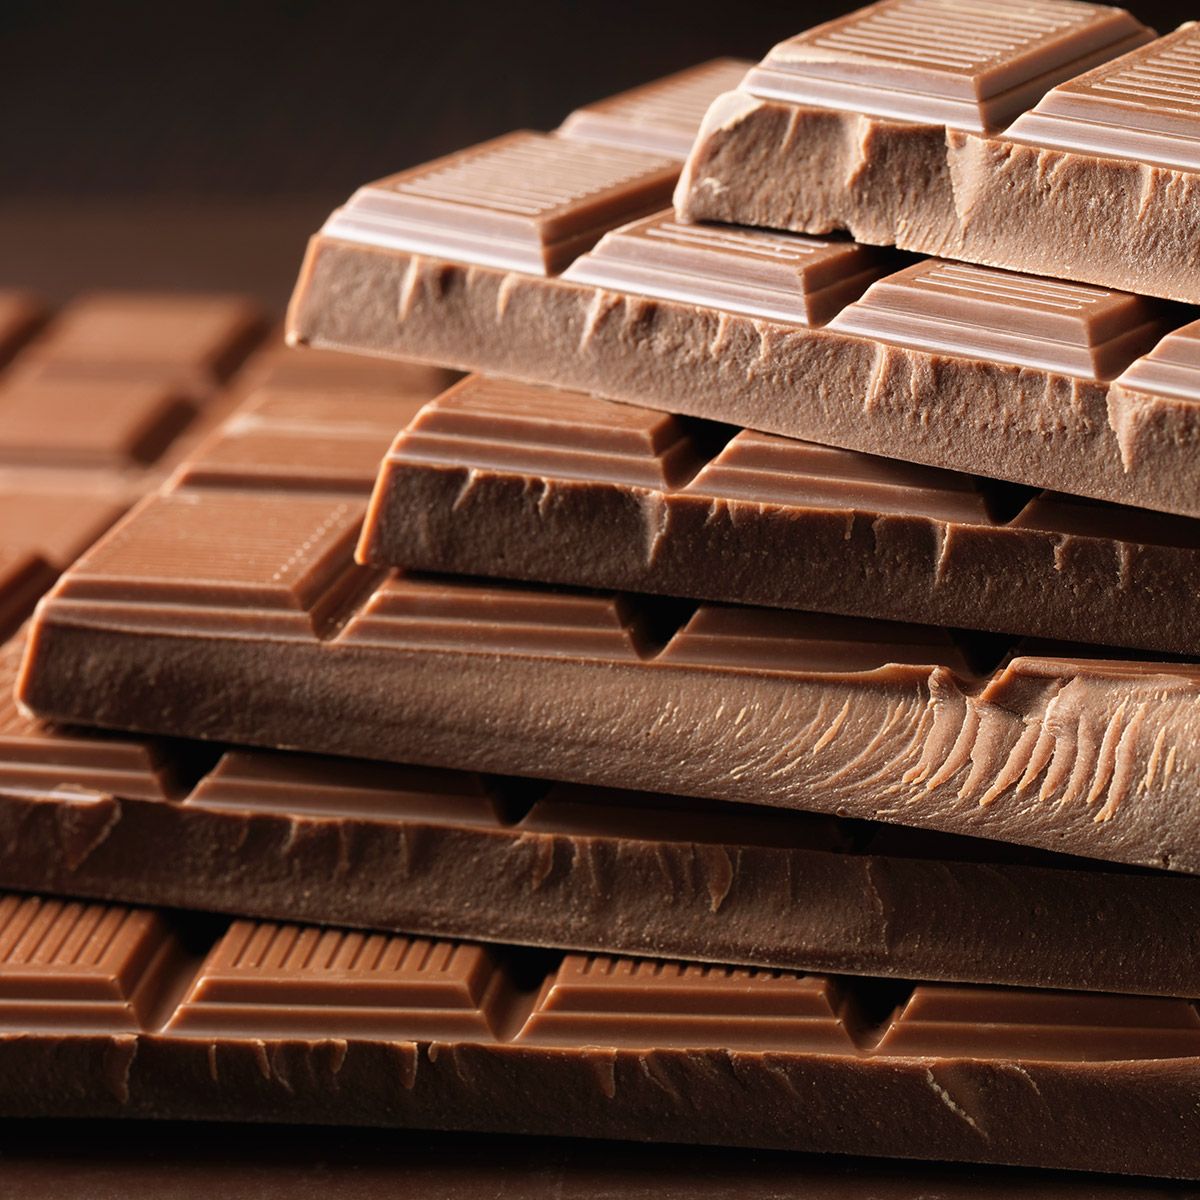 The Best Chocolate Bars for Baking